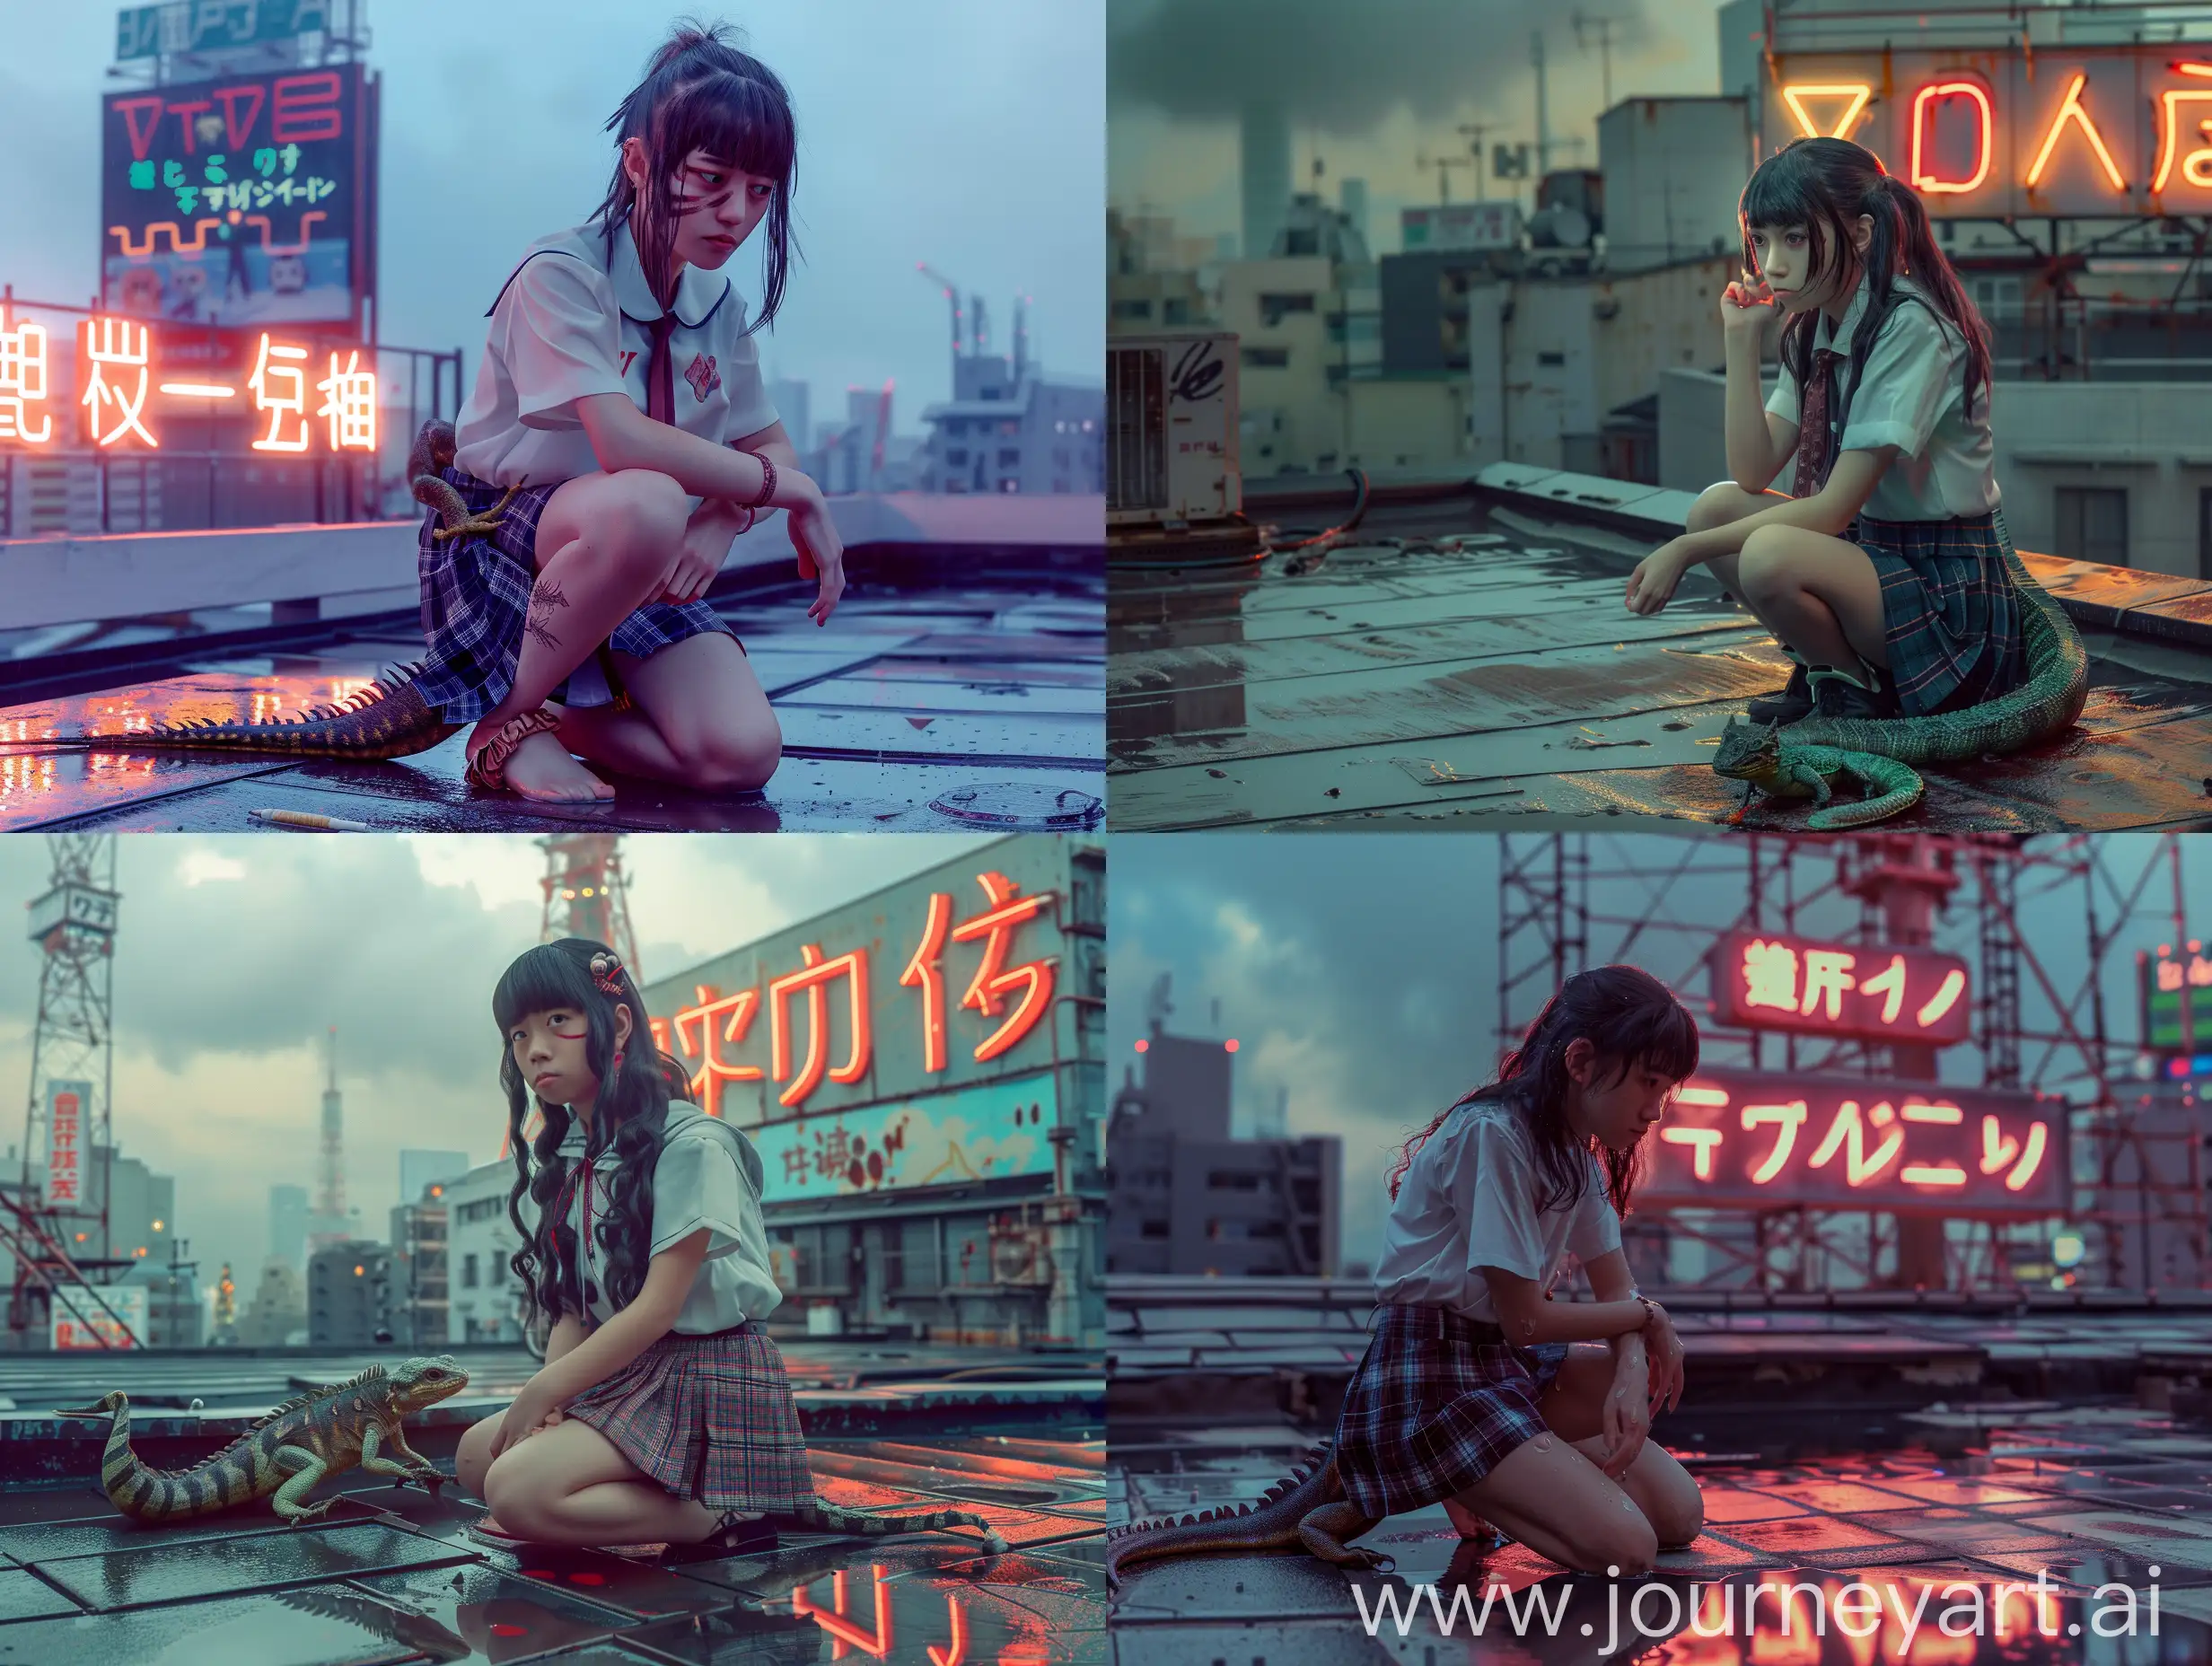 Portrait photo, cinematic, realism, use Medium-angle lens, long-shot, full-shot. Depiction of a yokai (((A Japanese girl with a lizard tail, wearing a student skirt, squatted on the ground and looked at the puddle))), Sitting on the rooftop (tokyo)  with a giant neon Signboard in the background